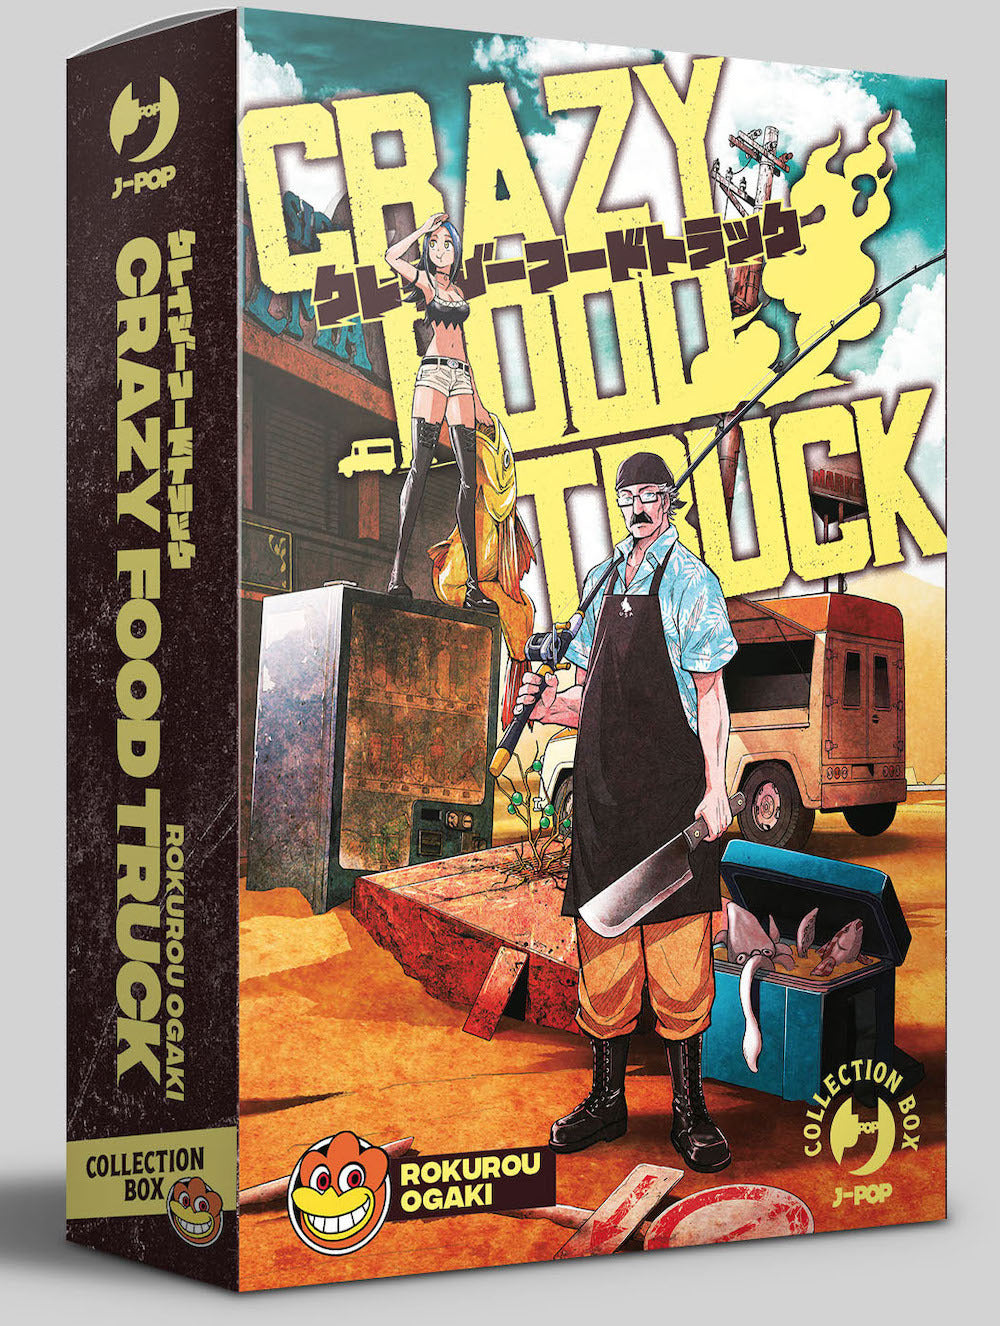 Crazy food truck. Collection box. Vol. 1-3